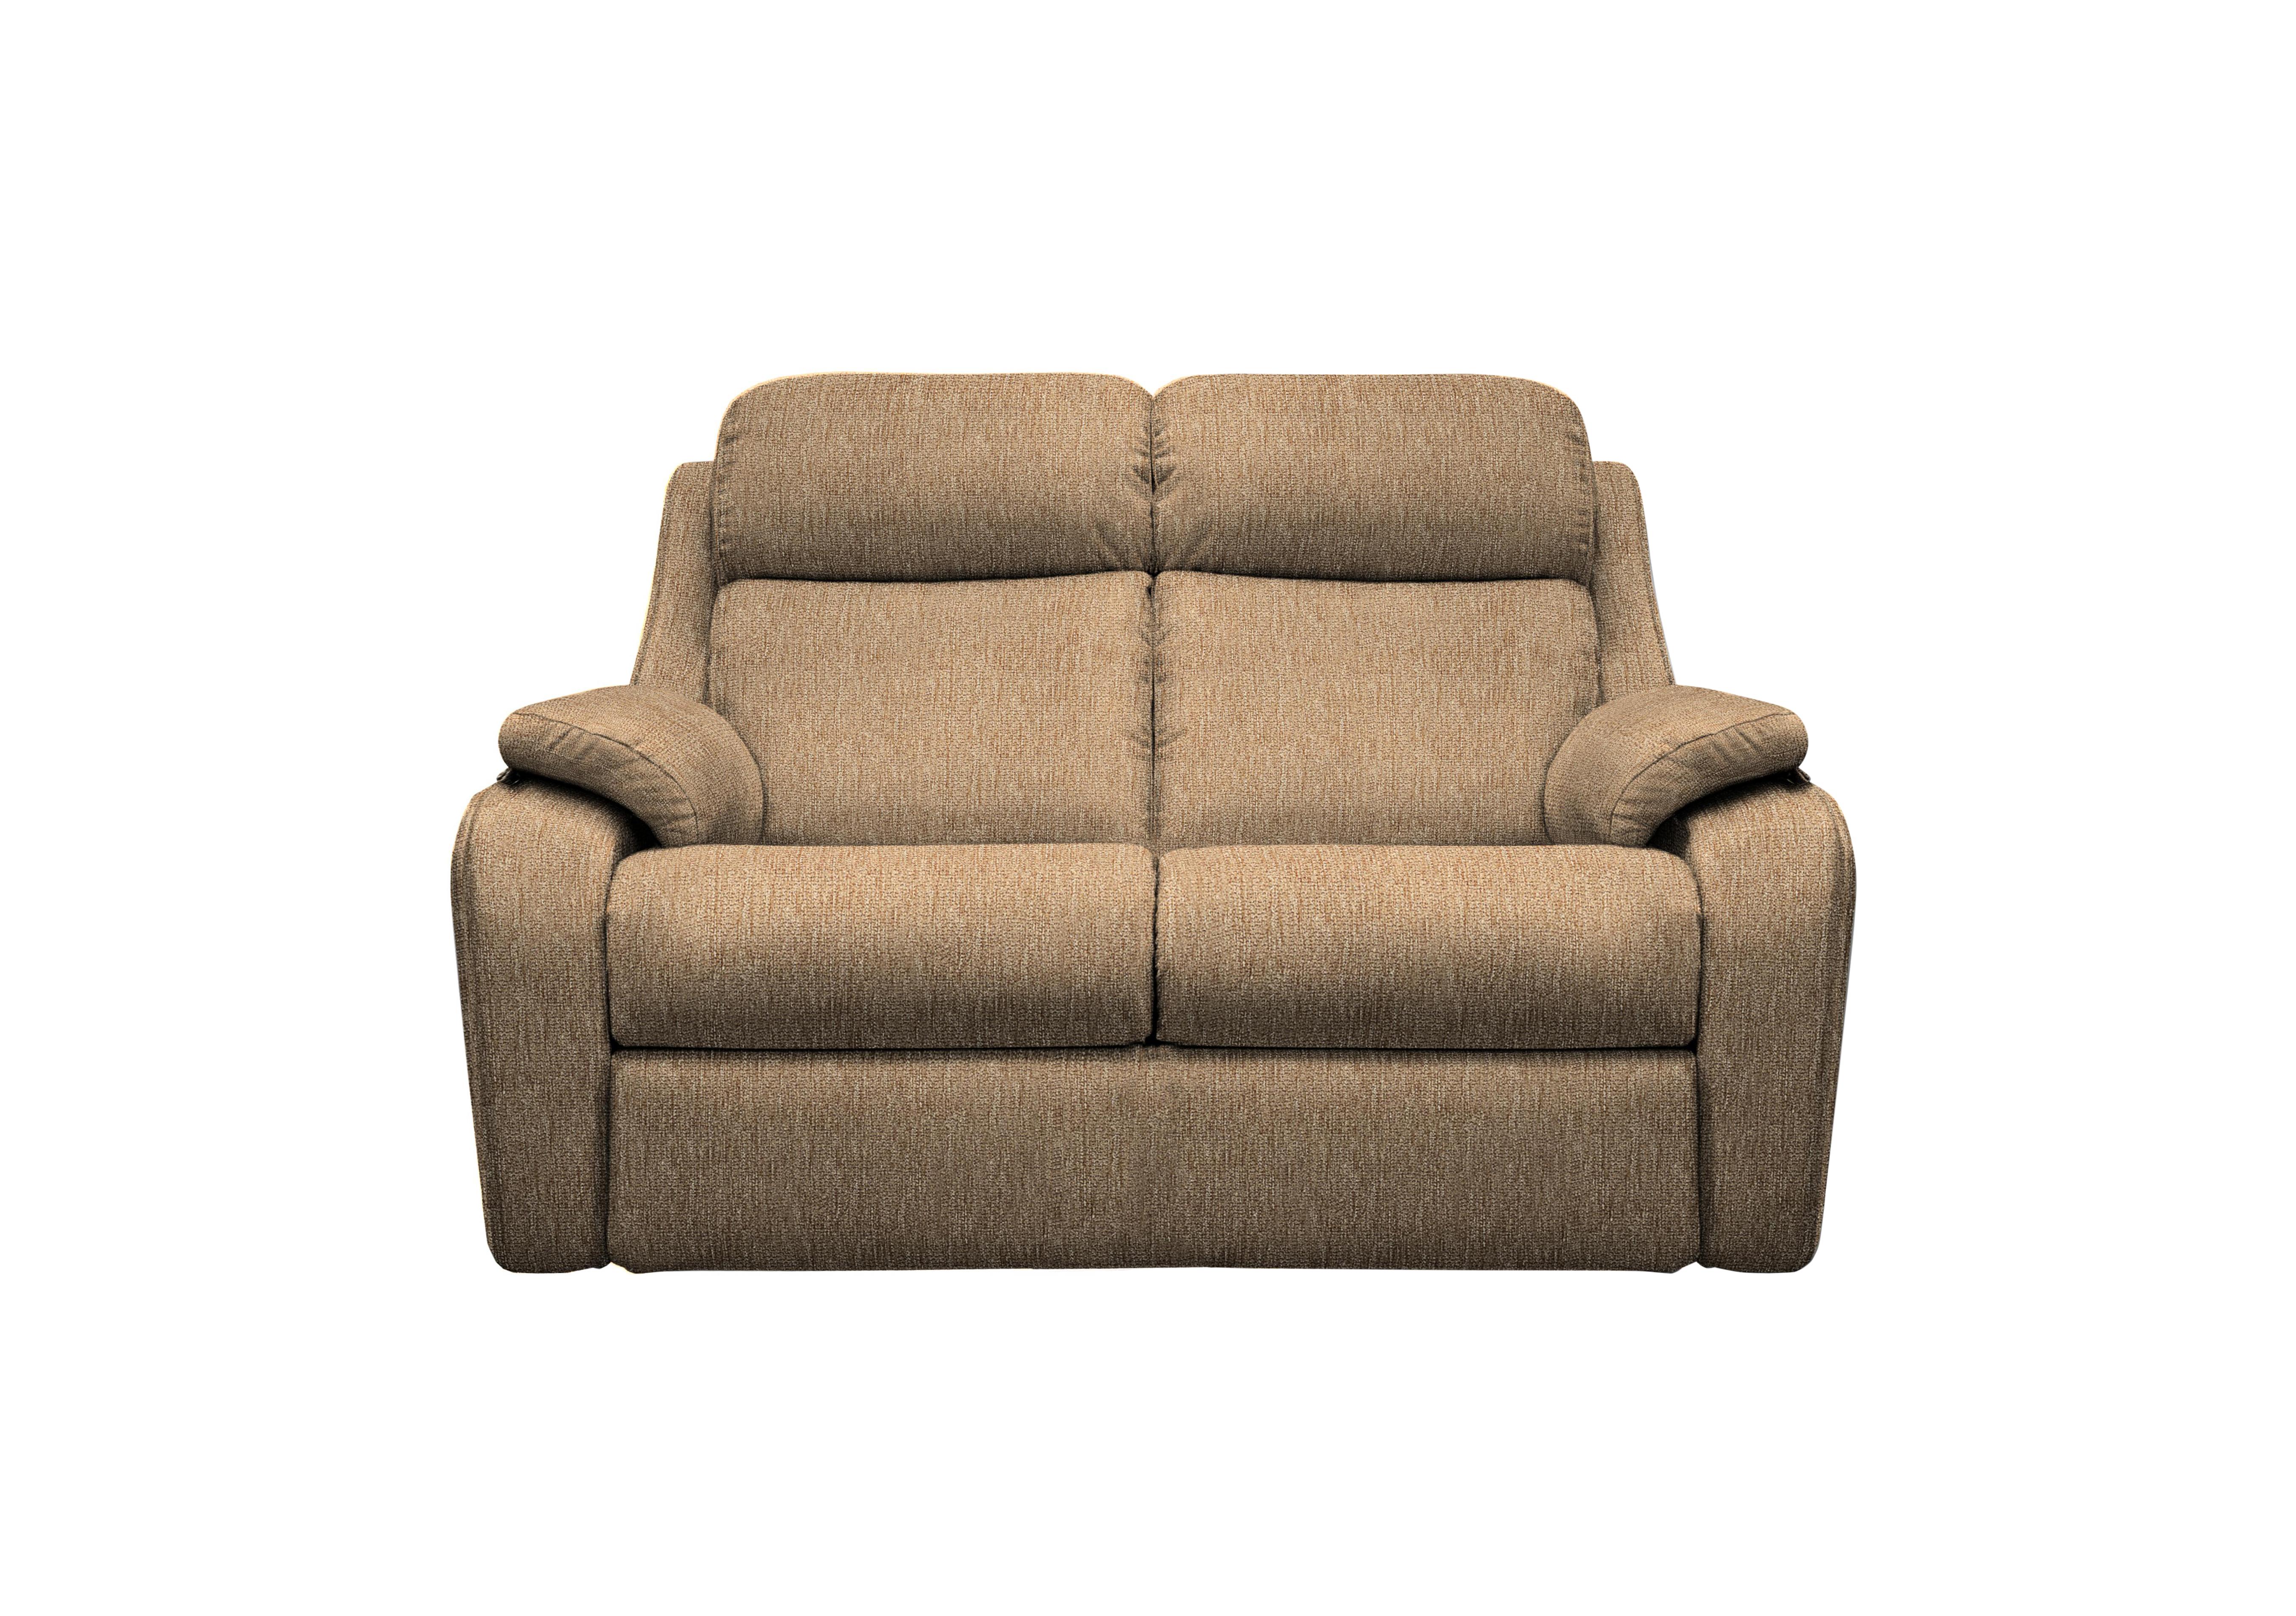 Kingsbury 2 Seater Fabric Sofa in A070 Boucle Cocoa on Furniture Village